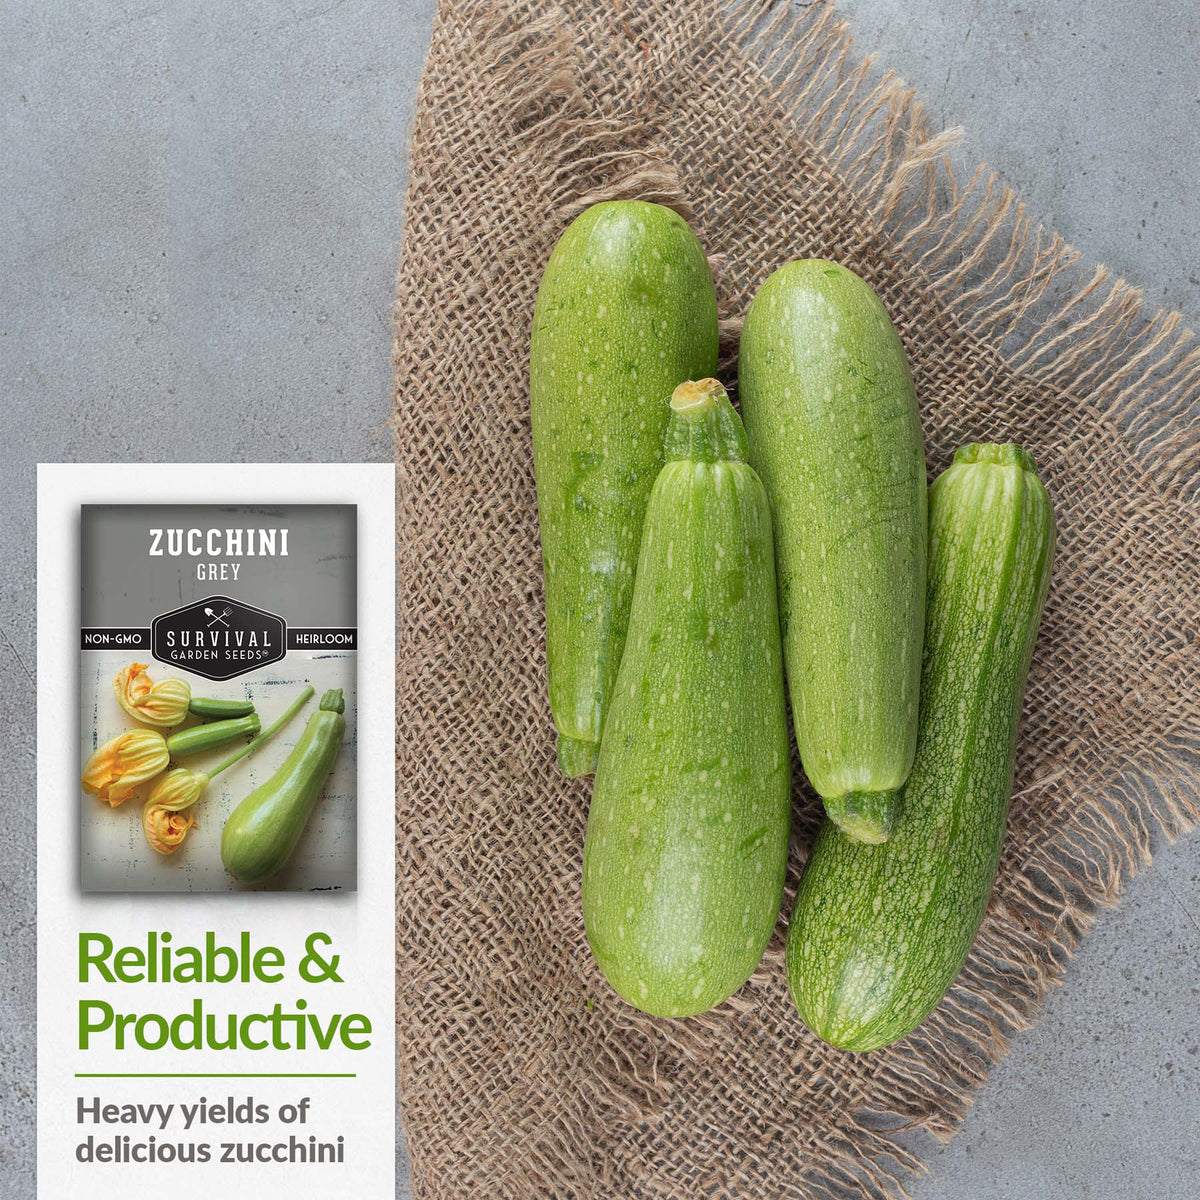 Grey Zucchini is reliable and productive